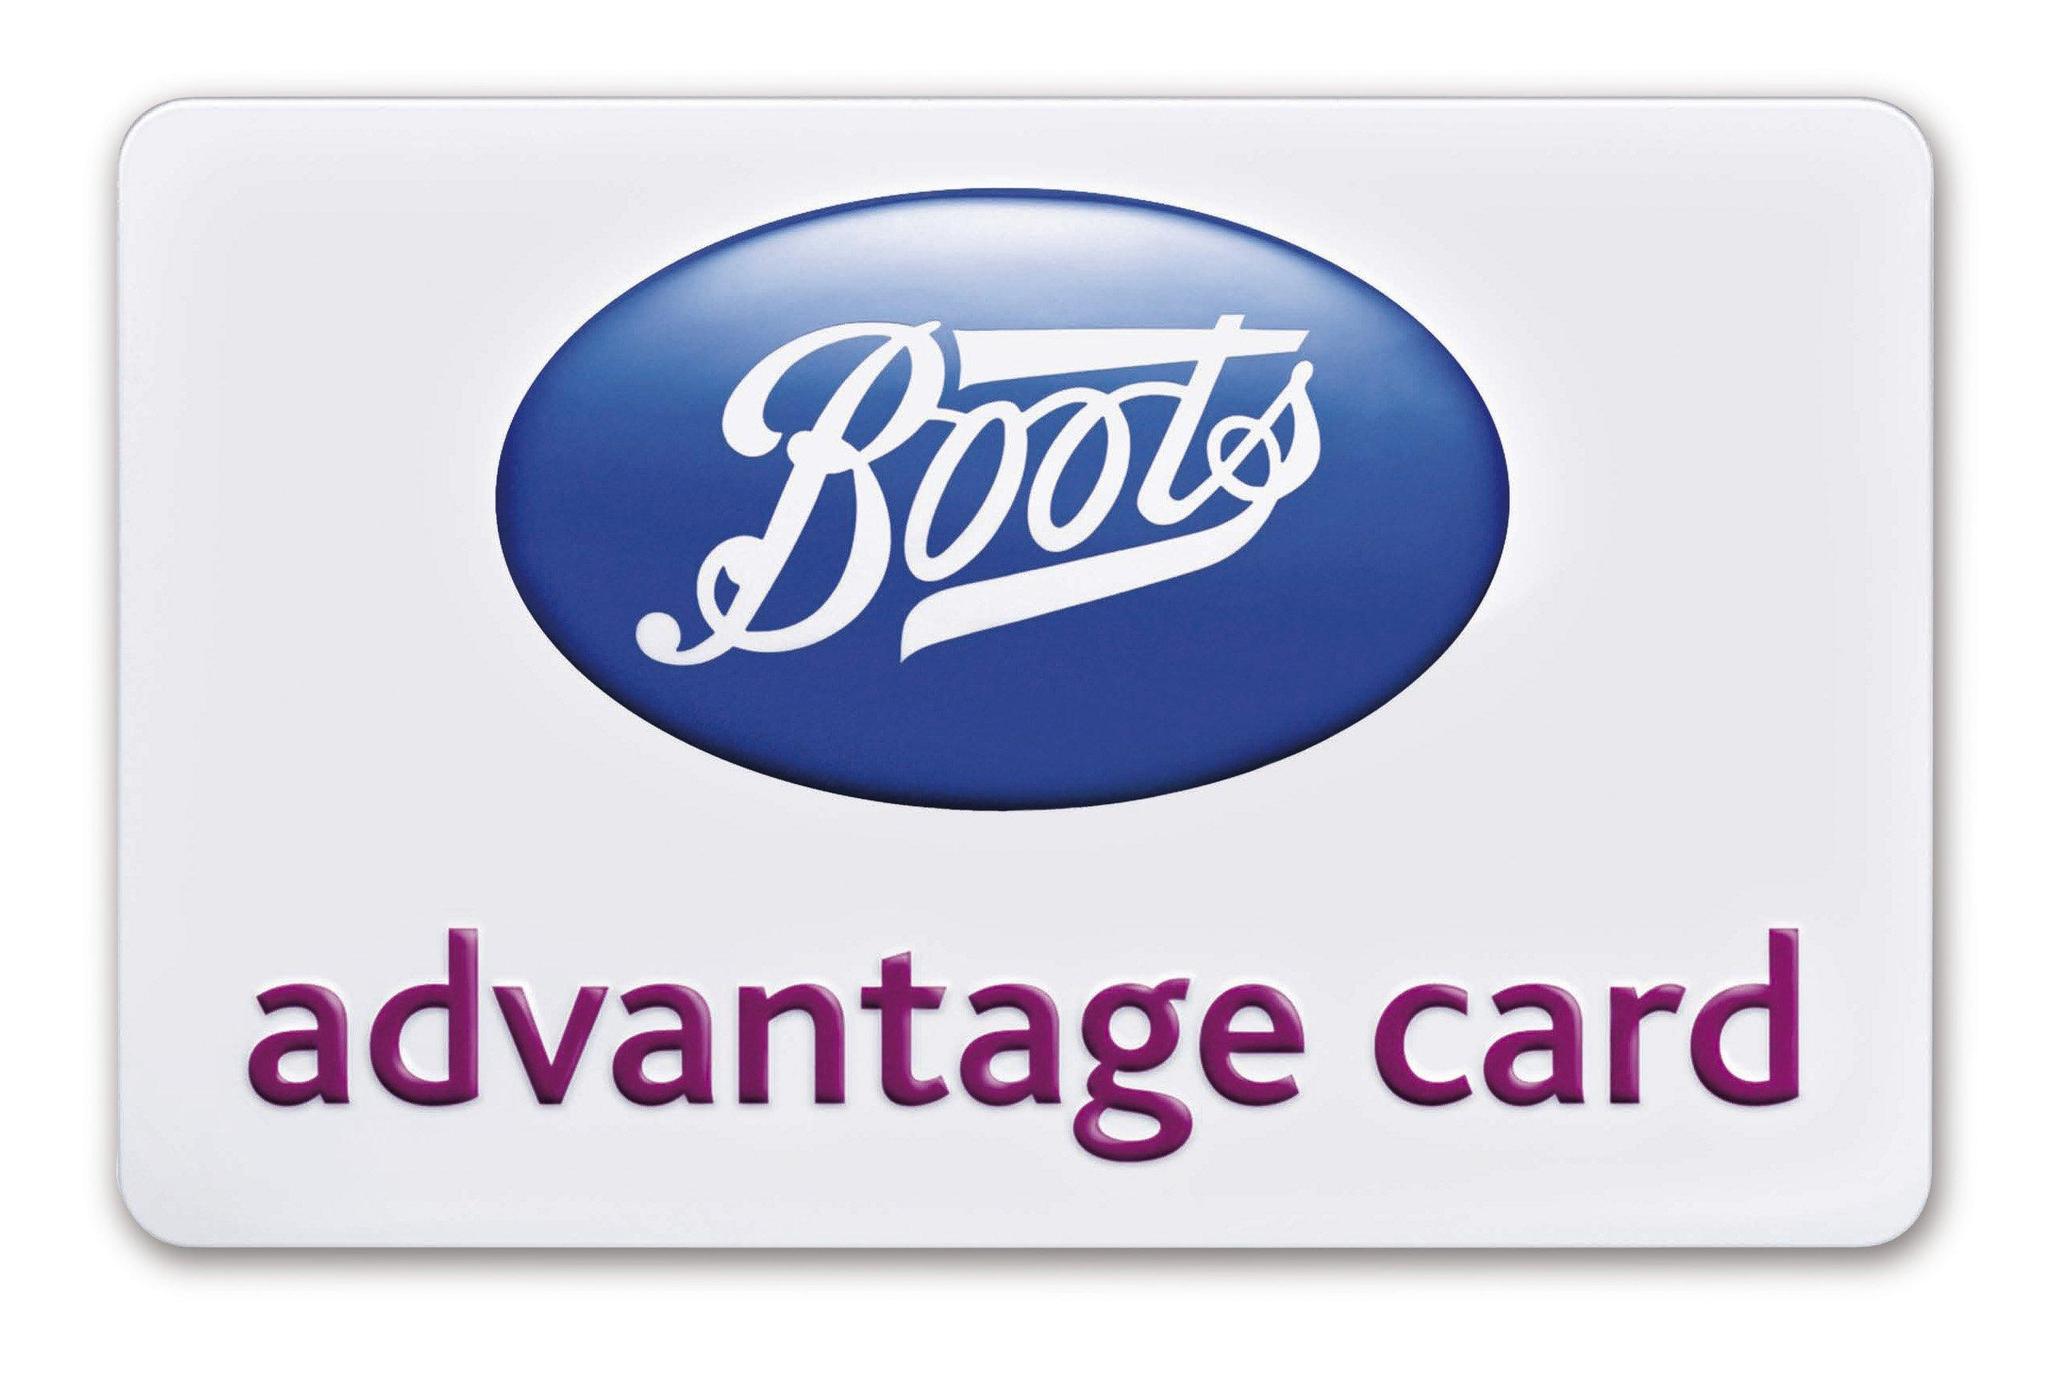 Boots Advantage Card...changes are being made to terms and conditions |  Belfast News Letter